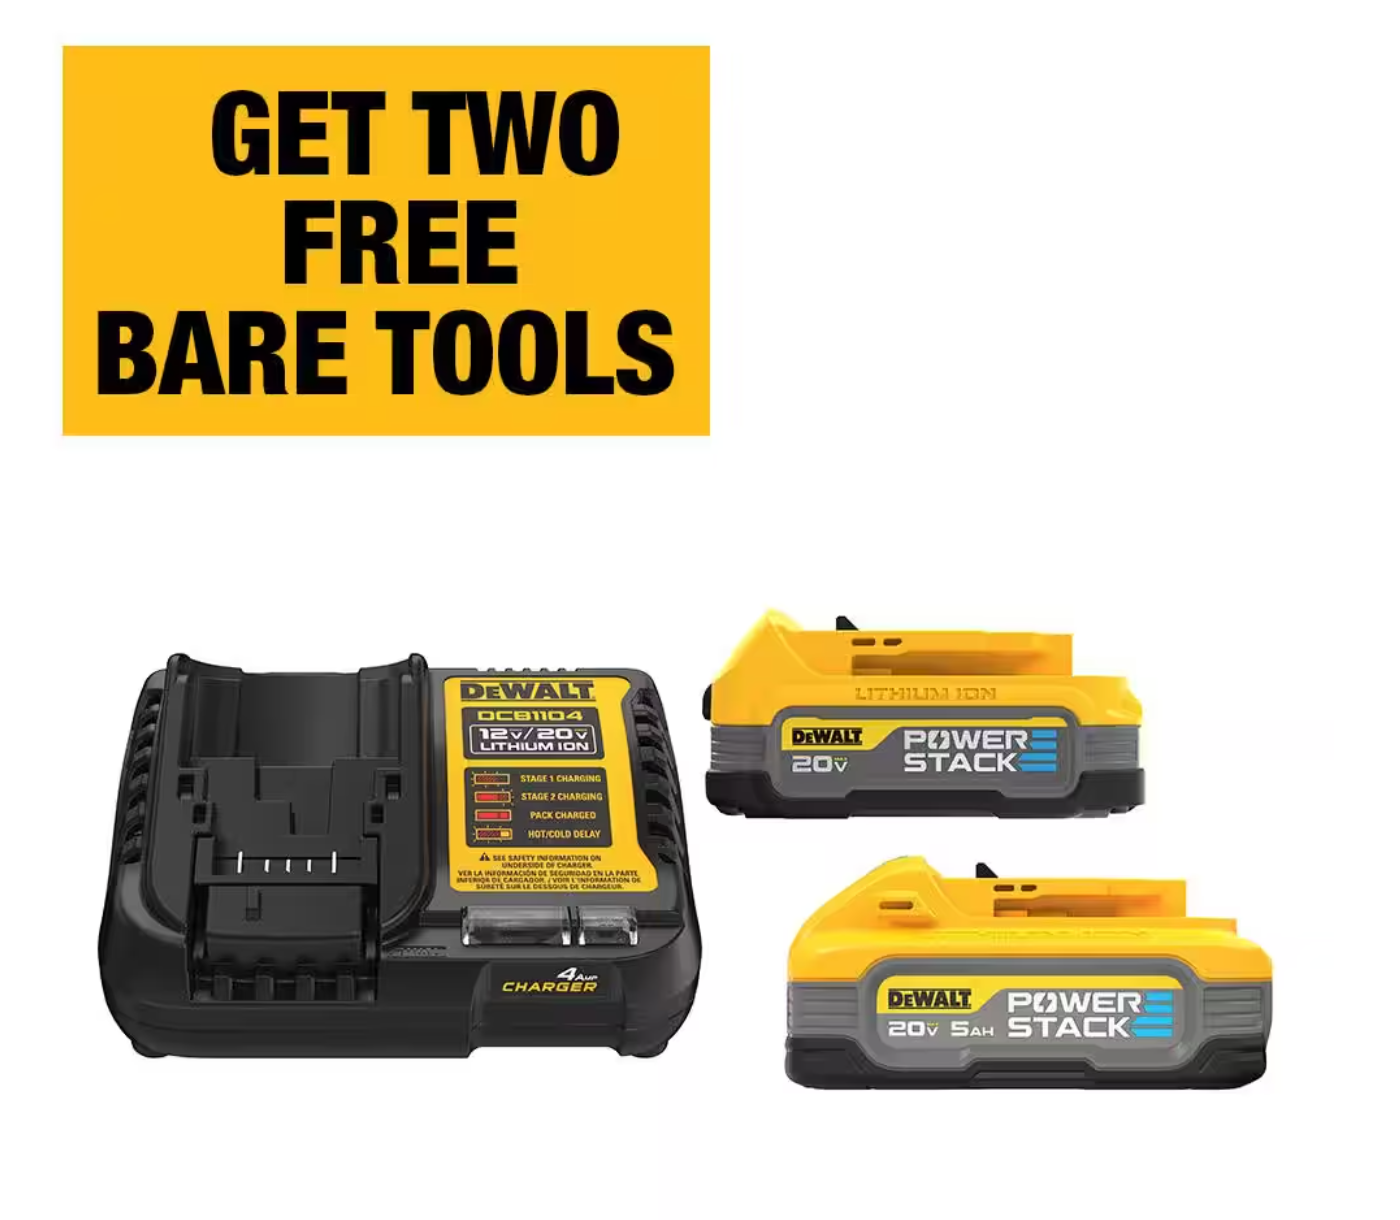 DeWalt Powerstack 20V Lithium-Ion 5.0Ah and 1.7Ah Batteries, Charger + Free Tools for $349